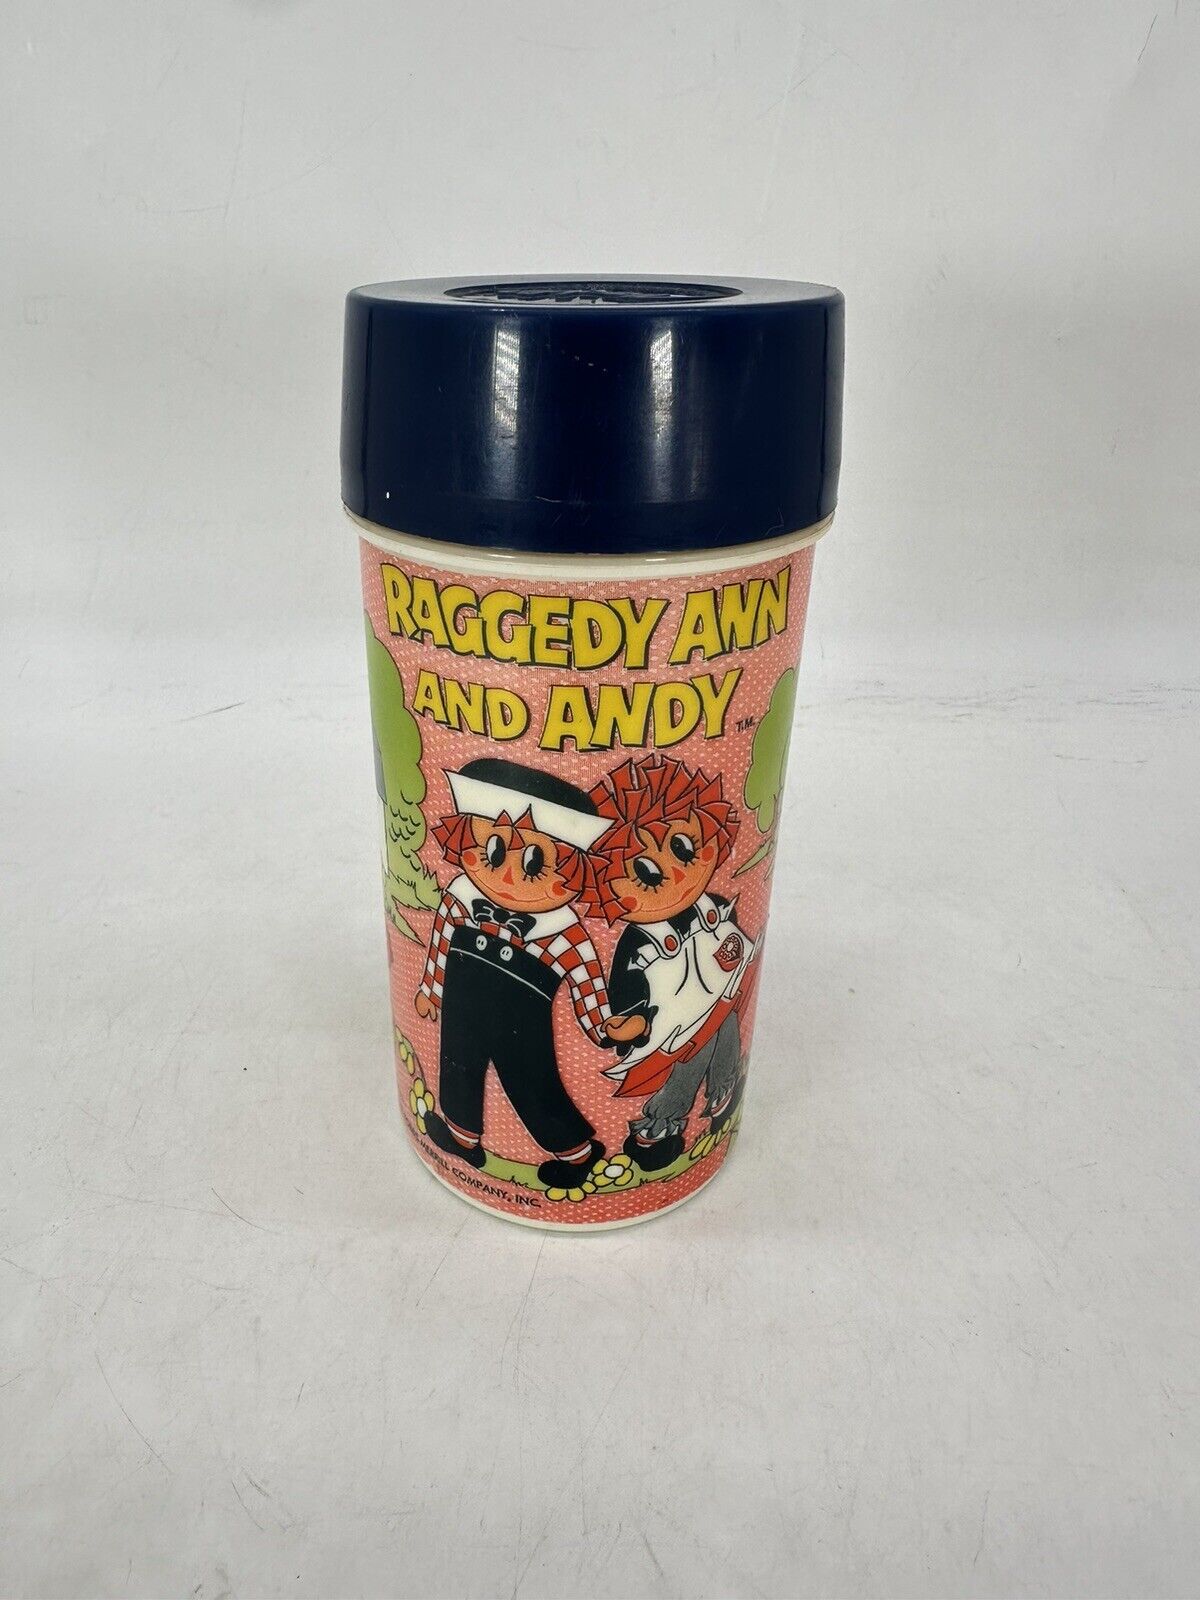 Vintage Raggedy Ann and Andy Thermos Bottle 1973 Aladdin